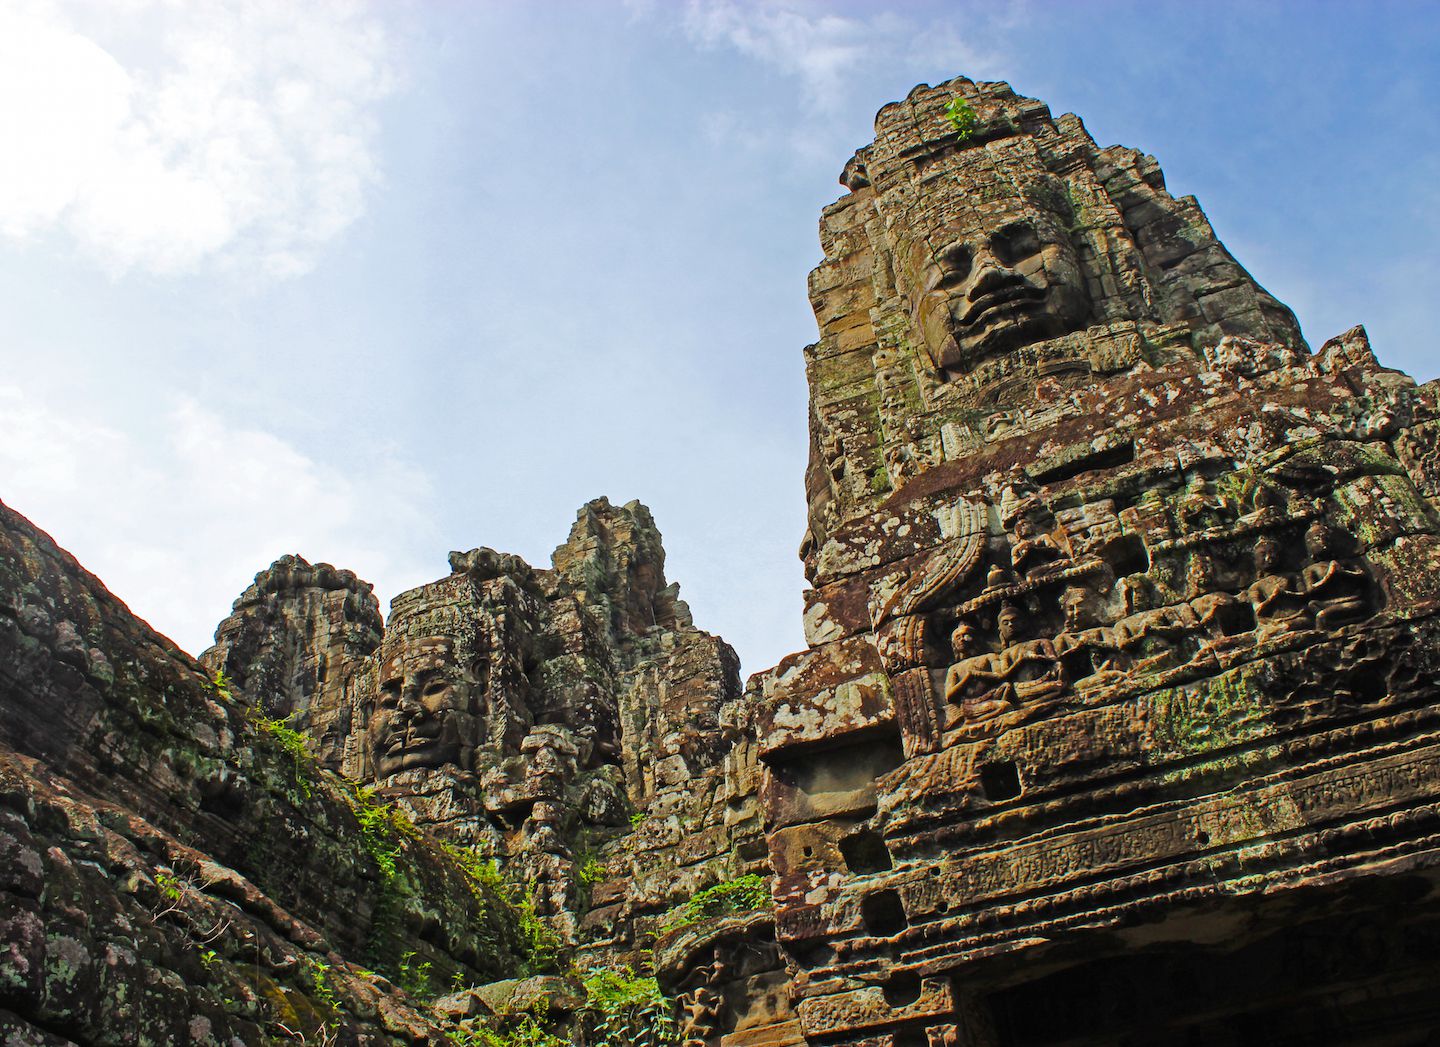 Face towers from the Bayon